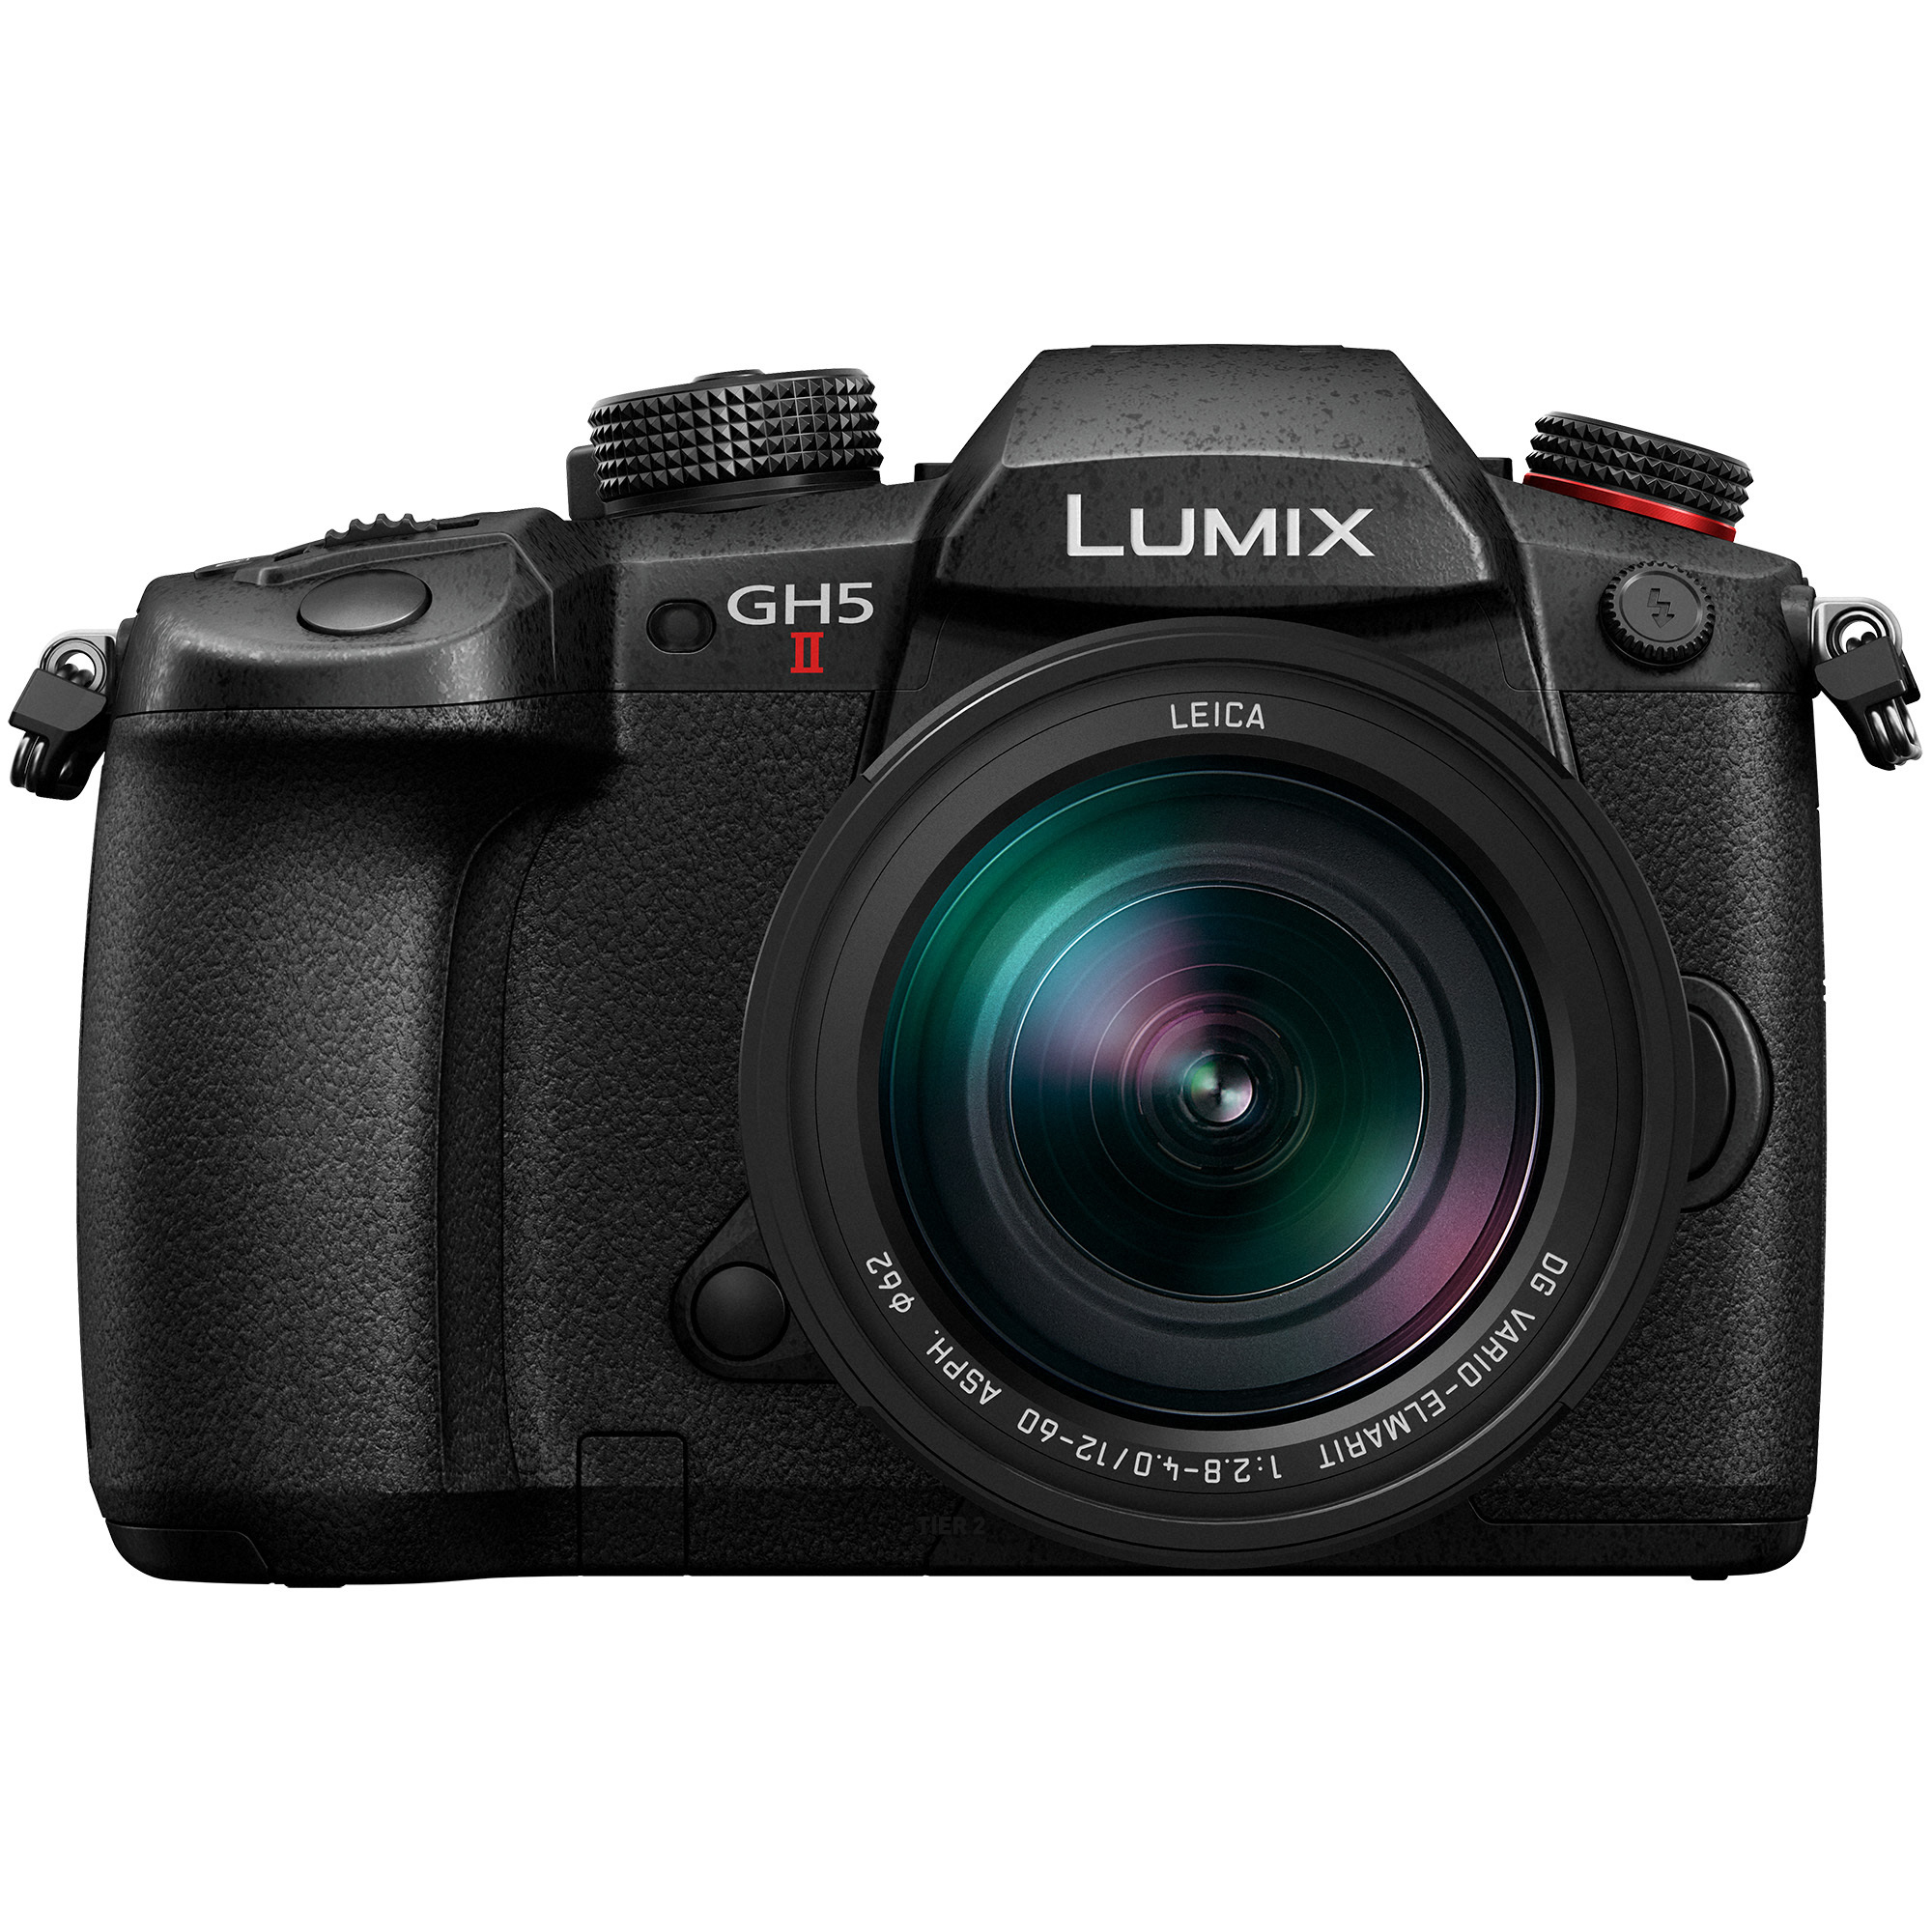 Panasonic Lumix GH5 II Mirrorless Camera with 12-60mm f/2.8-4 Camera Lens and Live Streaming in Black